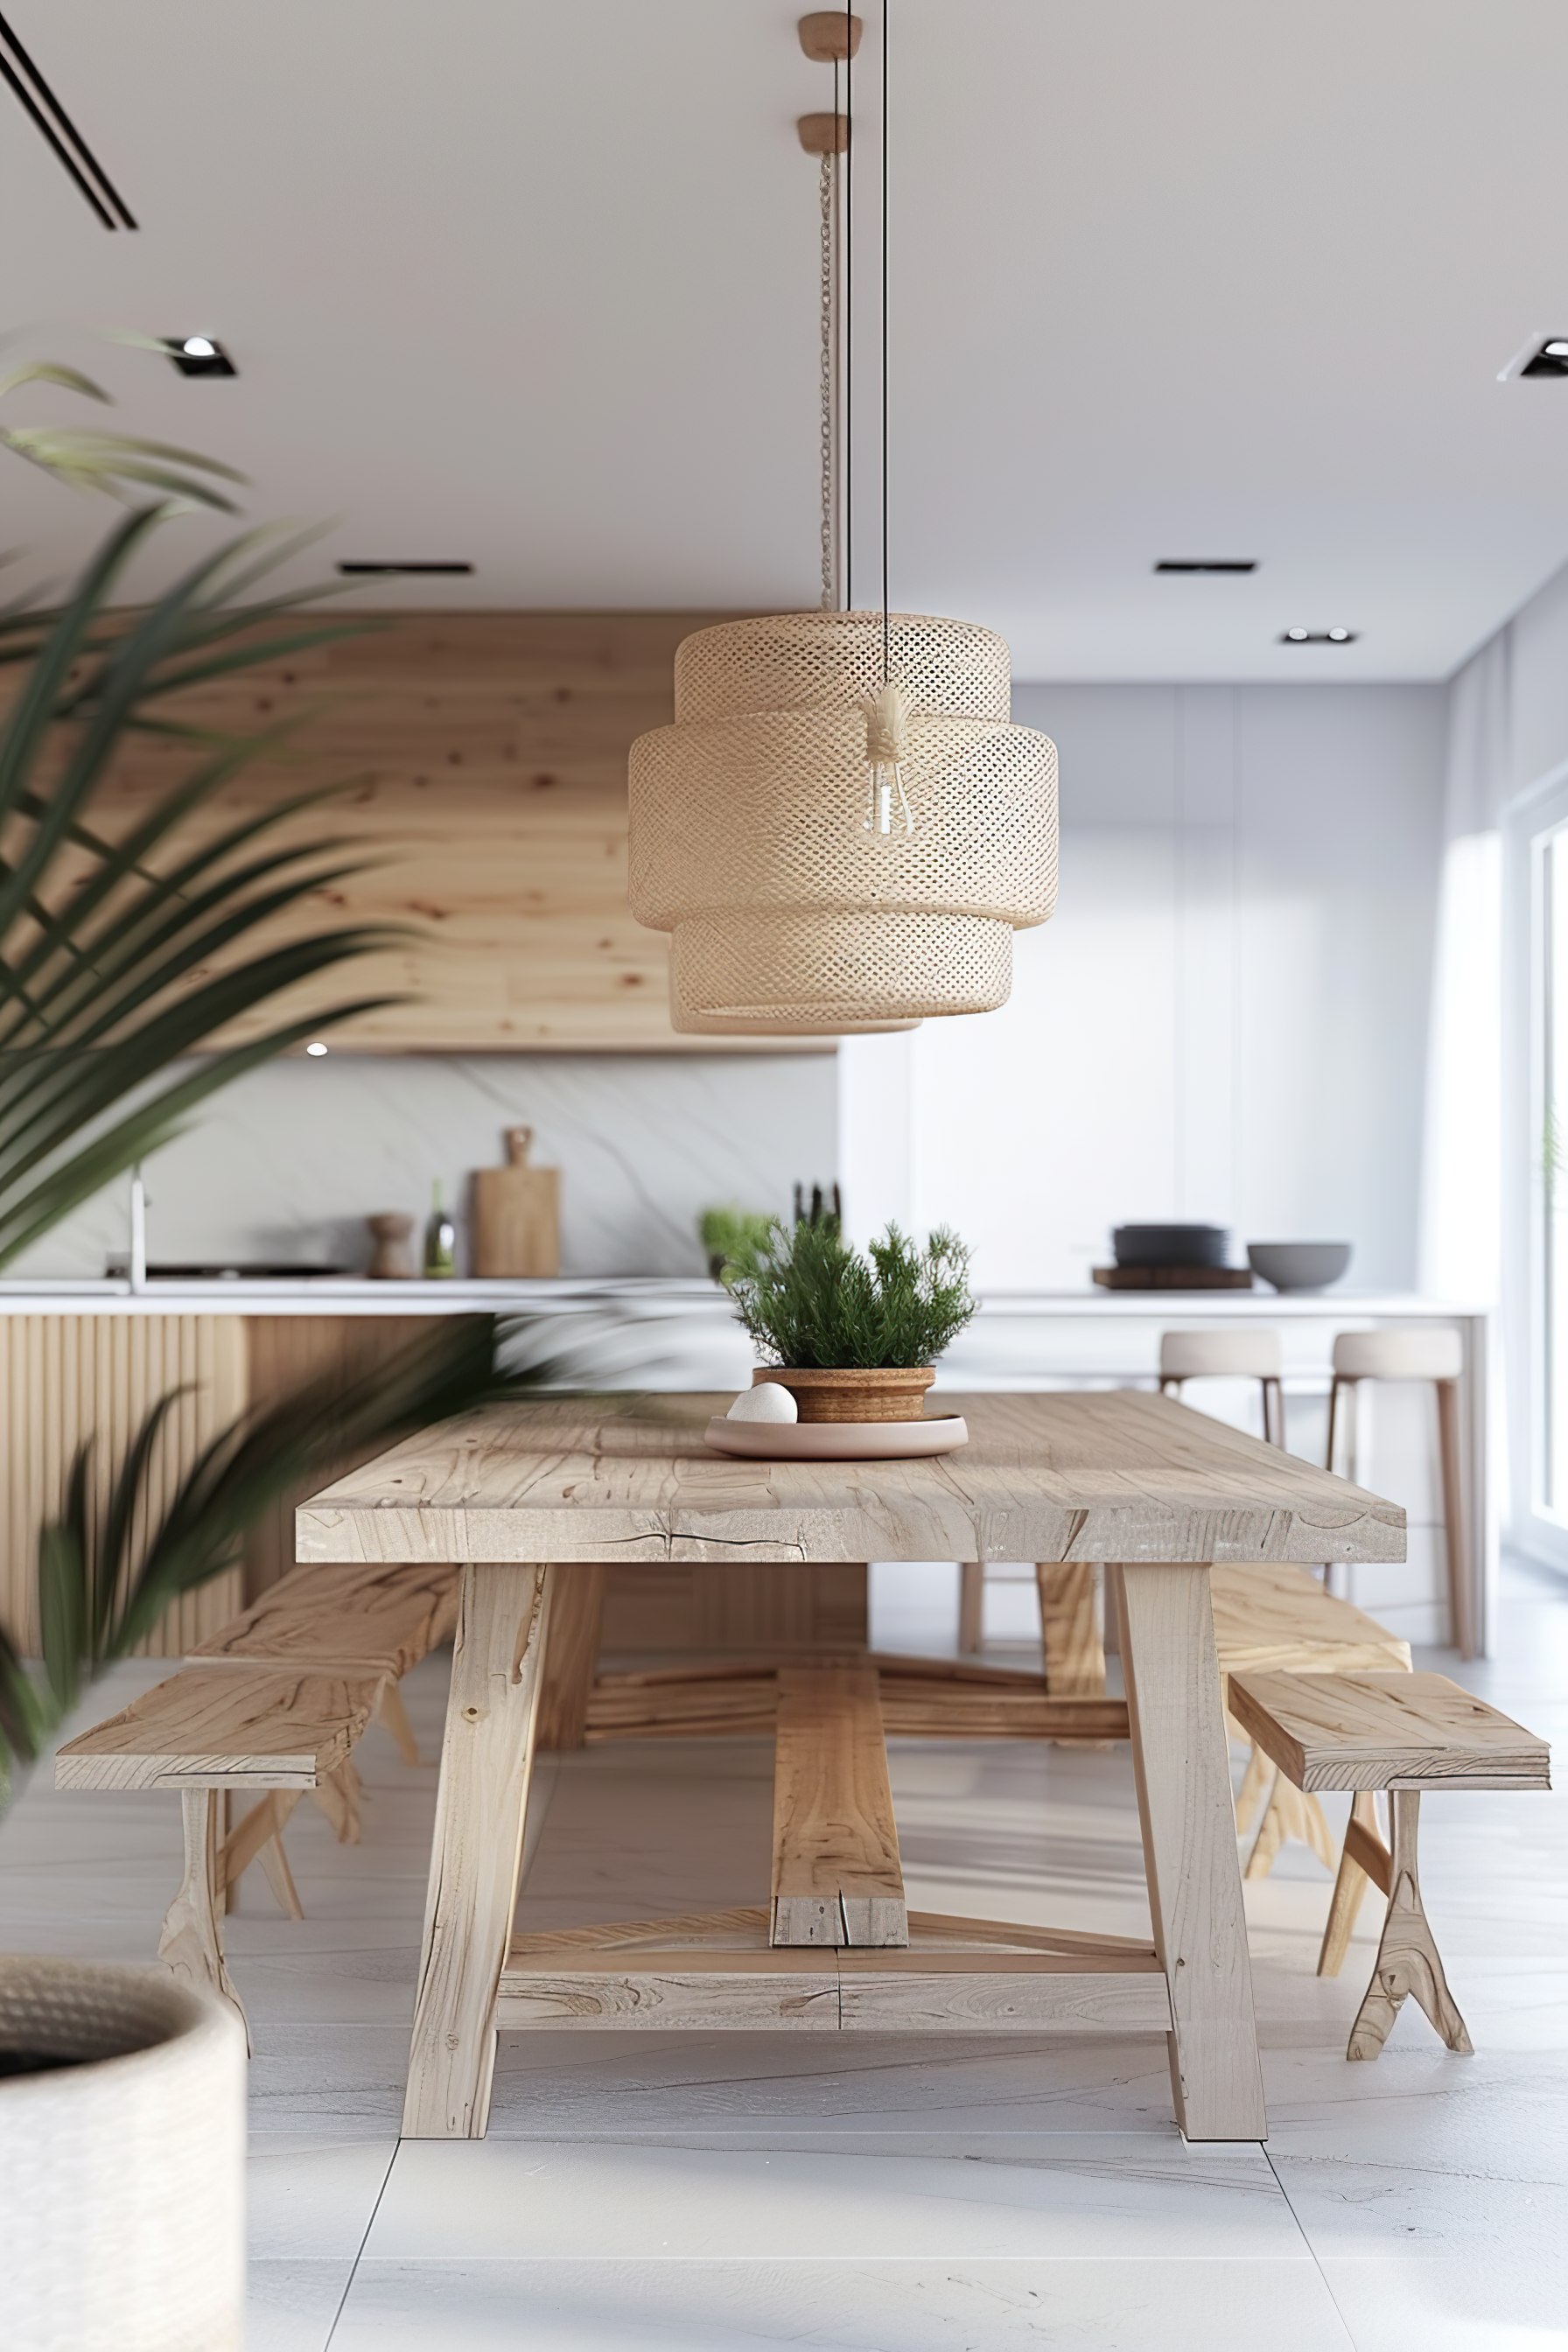 Modern dining room with a wooden table and benches, rattan pendant lights above, and a green plant centerpiece.